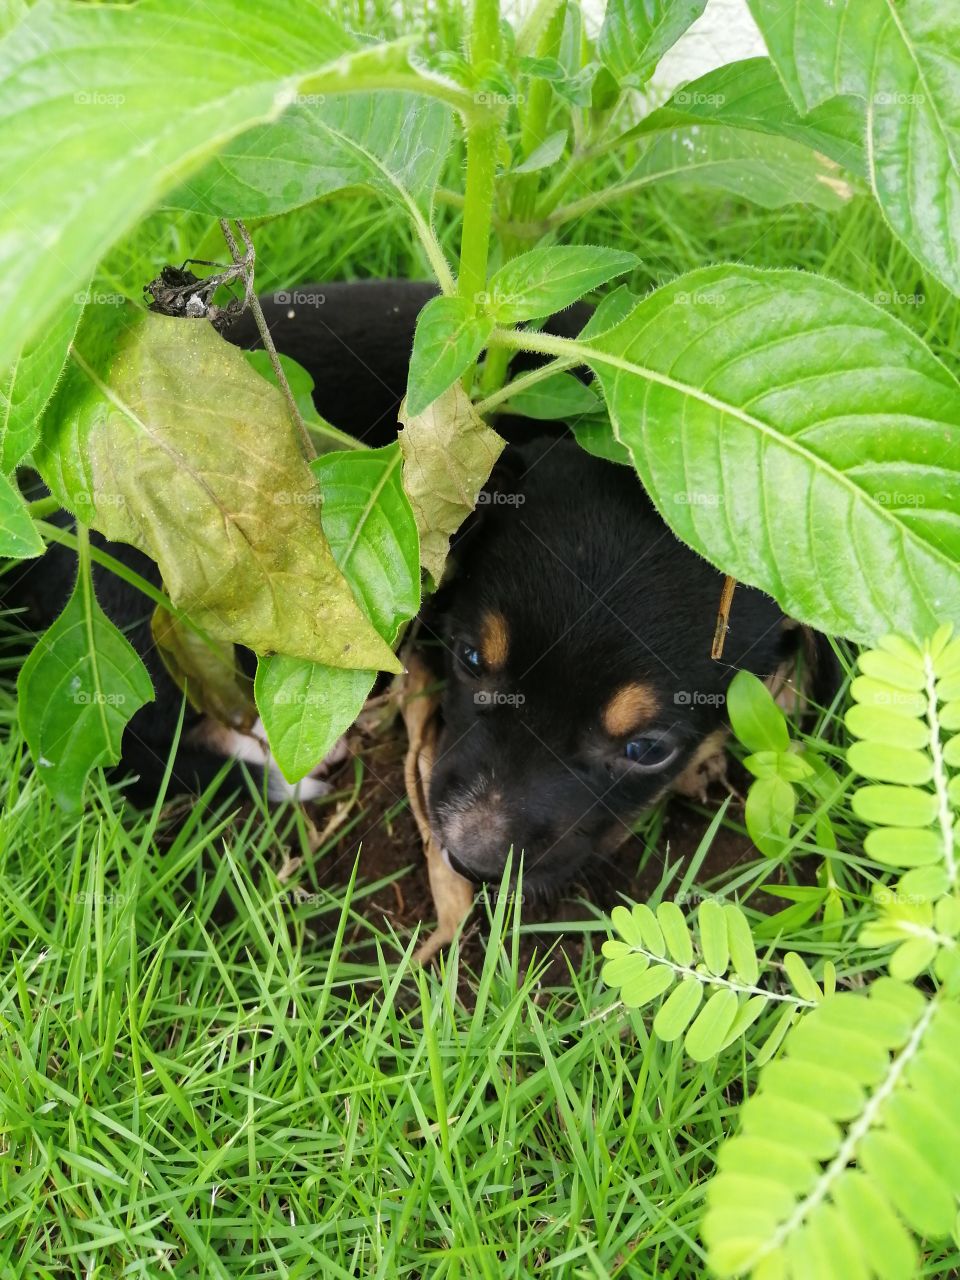 The black puppy is hiding under the flower plant. Look so nice.